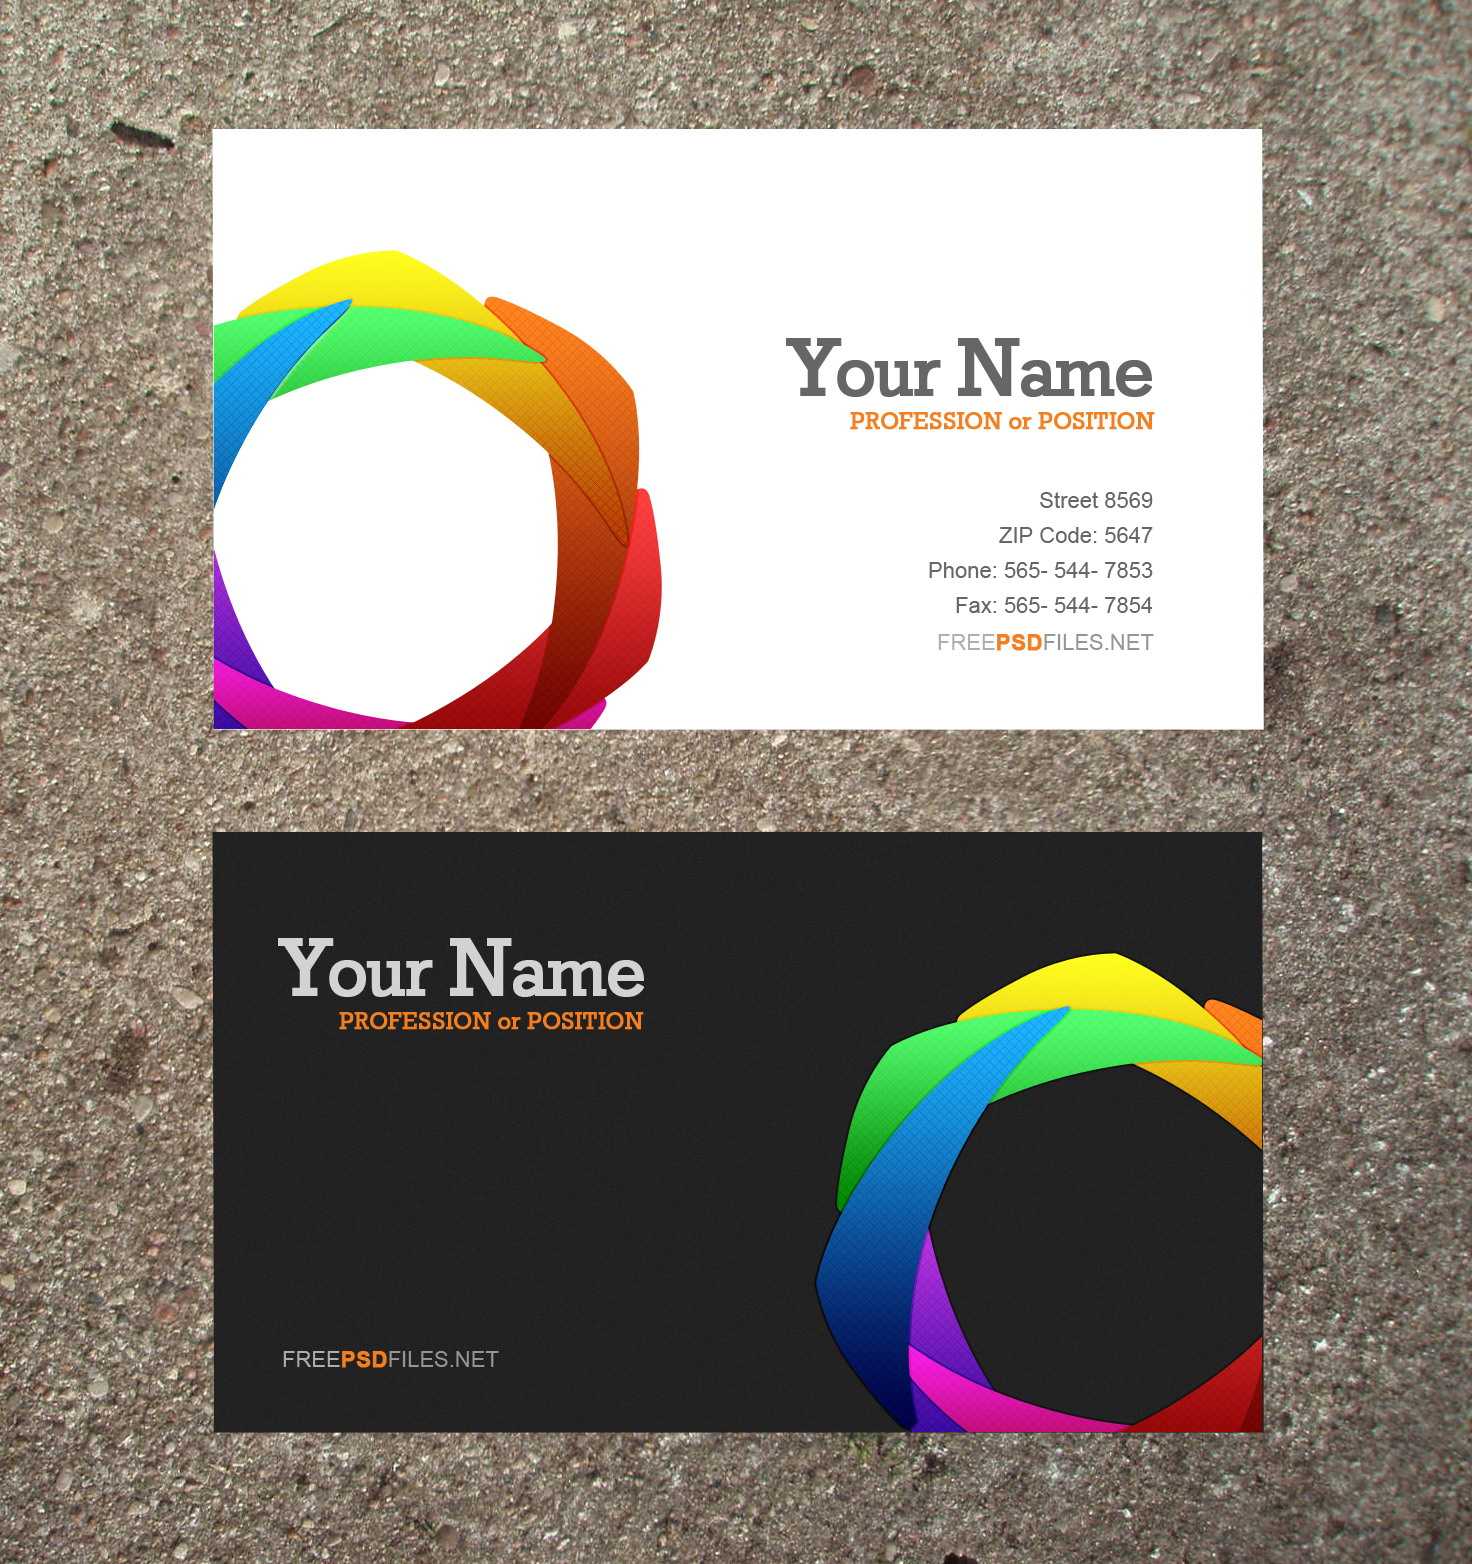 17 Business Cards Templates Free Downloads Images – Free With Blank Business Card Template Download